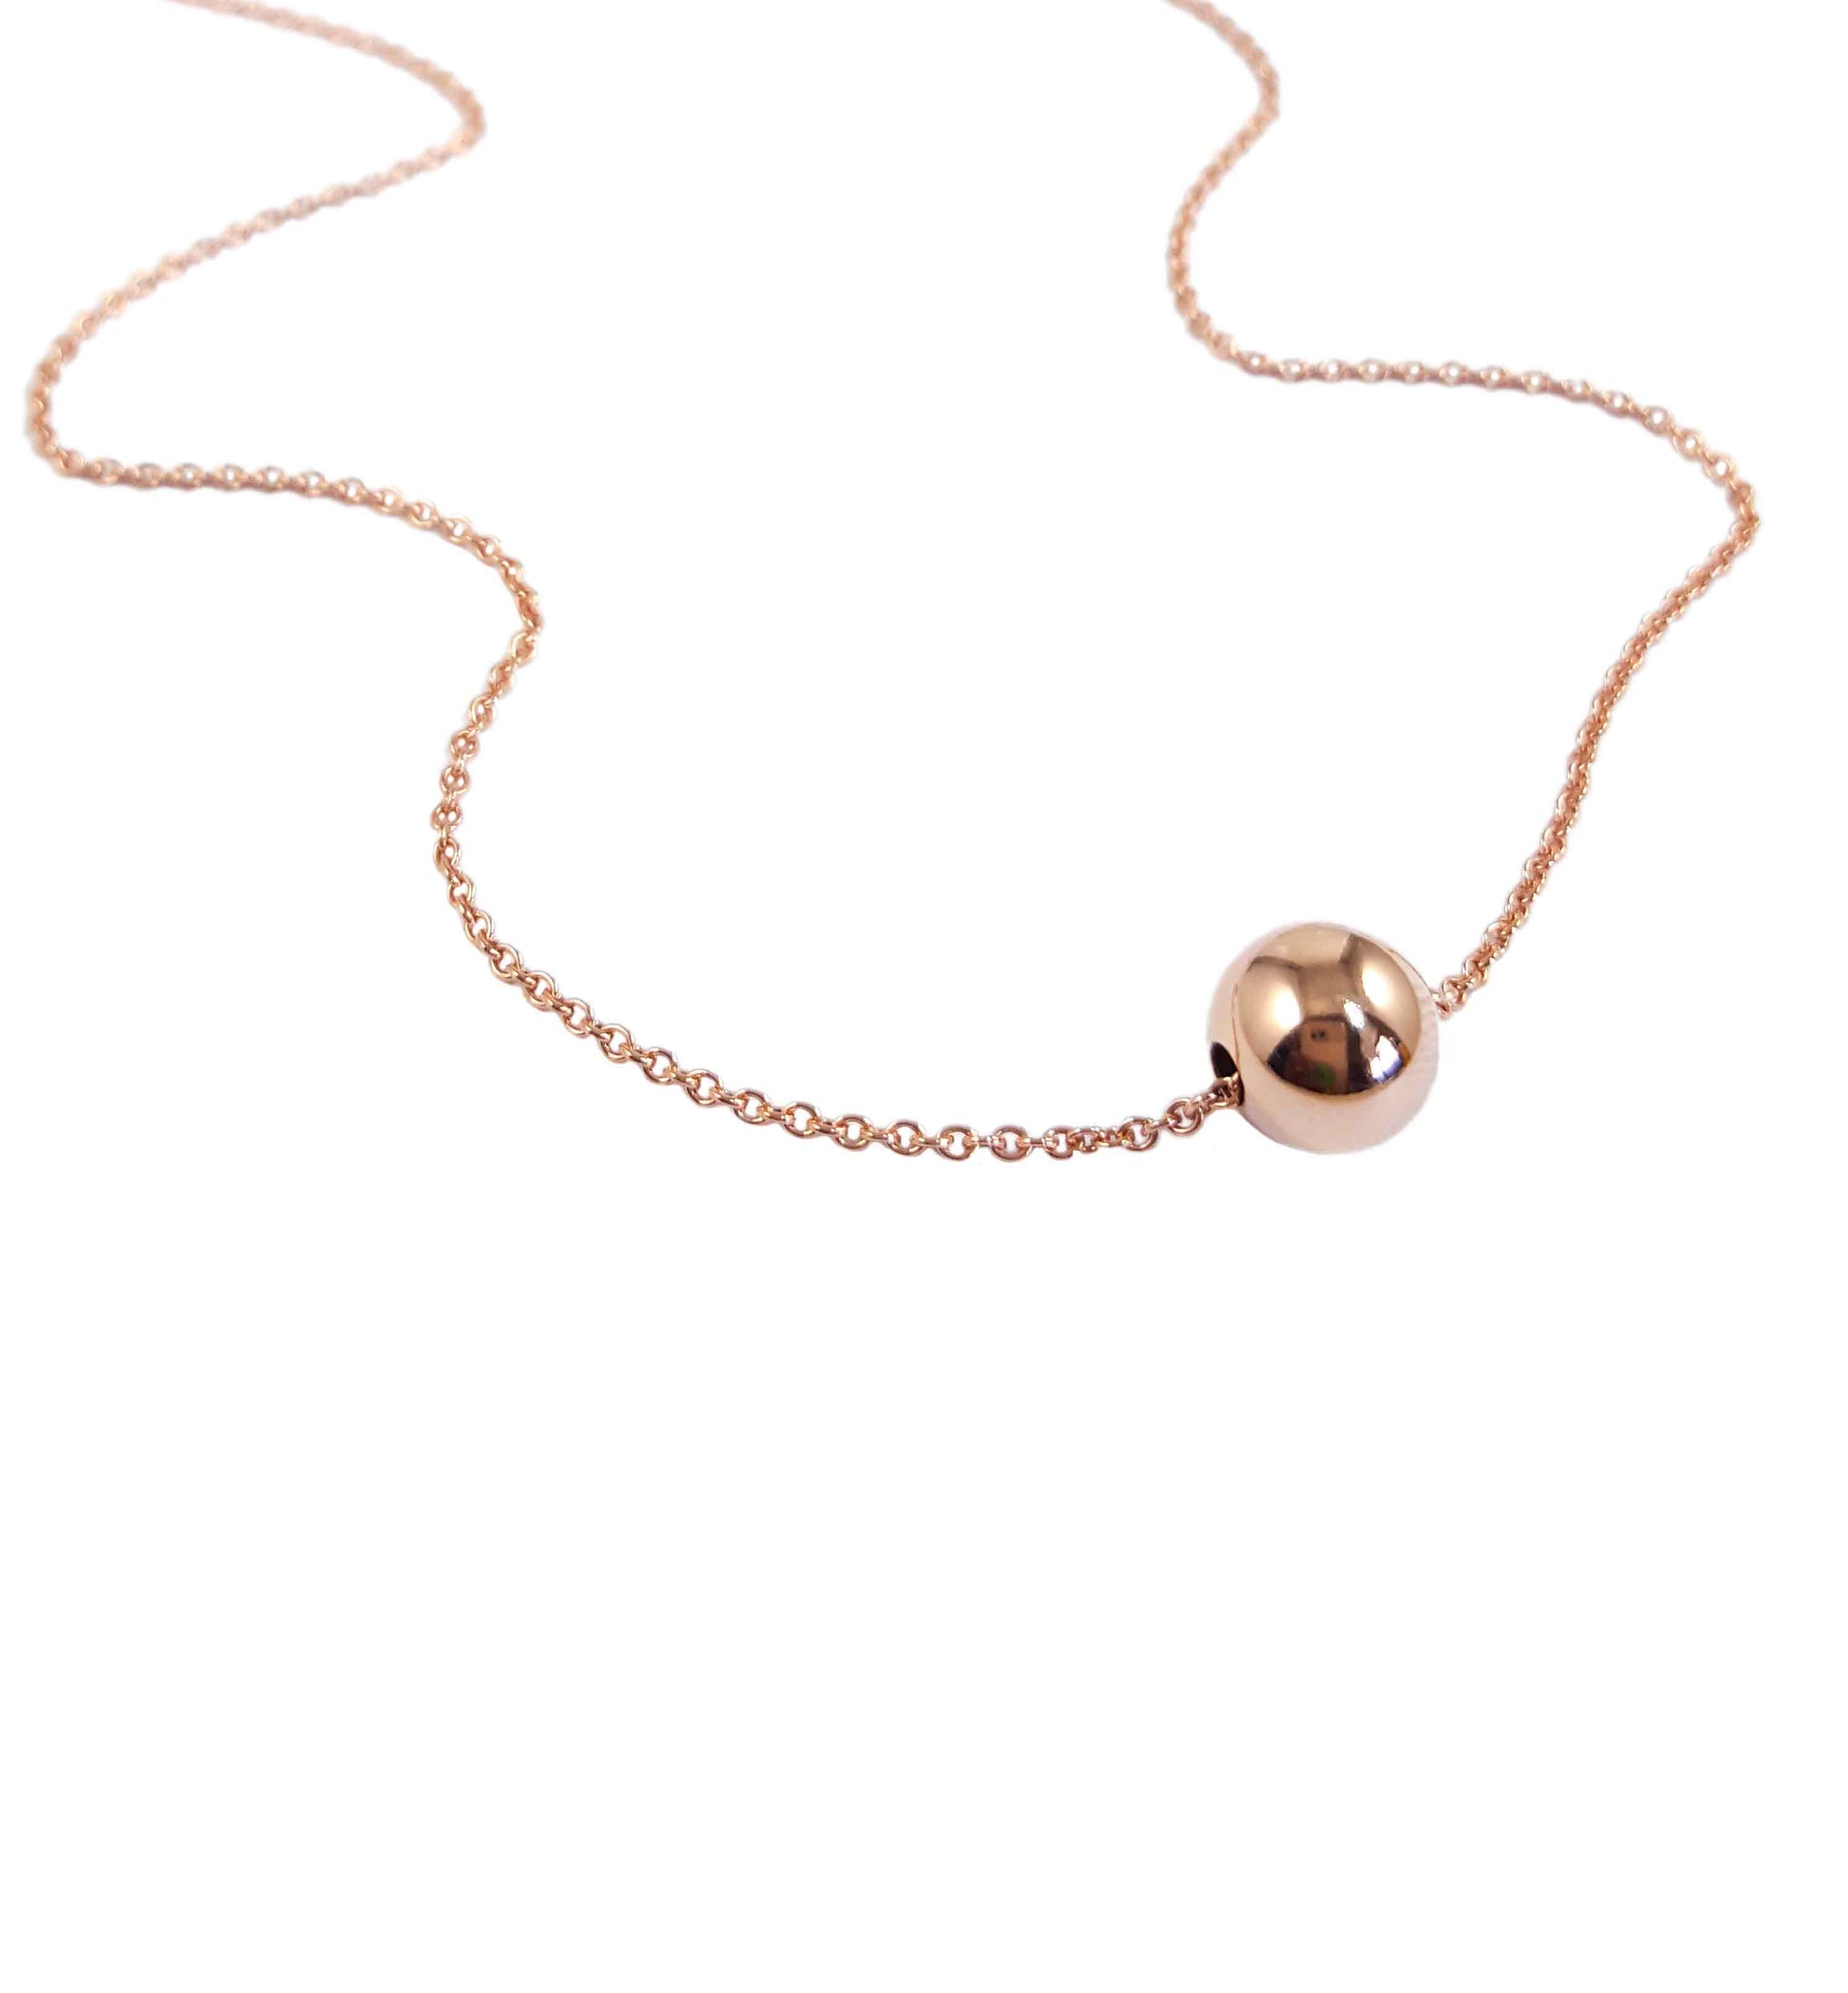 Rose gold ball necklace | Minimalist collection